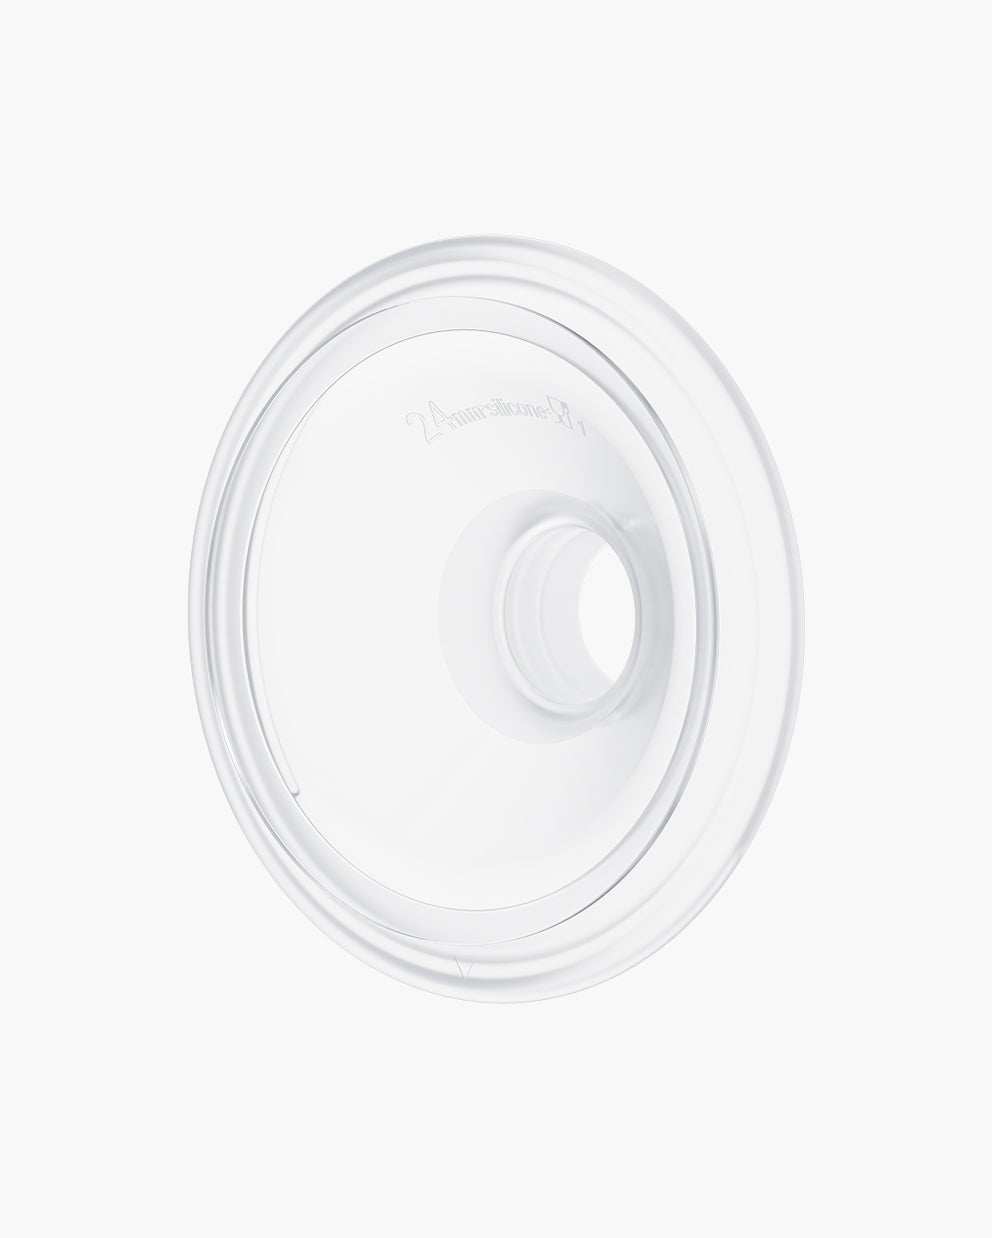 Momcozy S12 Pro Hands-Free Breast Pump Wearable, Double Wireless Pump with  Comfortable Double-Sealed Flange, 3 Modes & 9 Levels Electric Pump  Portable, Smart Display, 24mm, 2 Pack - Coupon Codes, Promo Codes